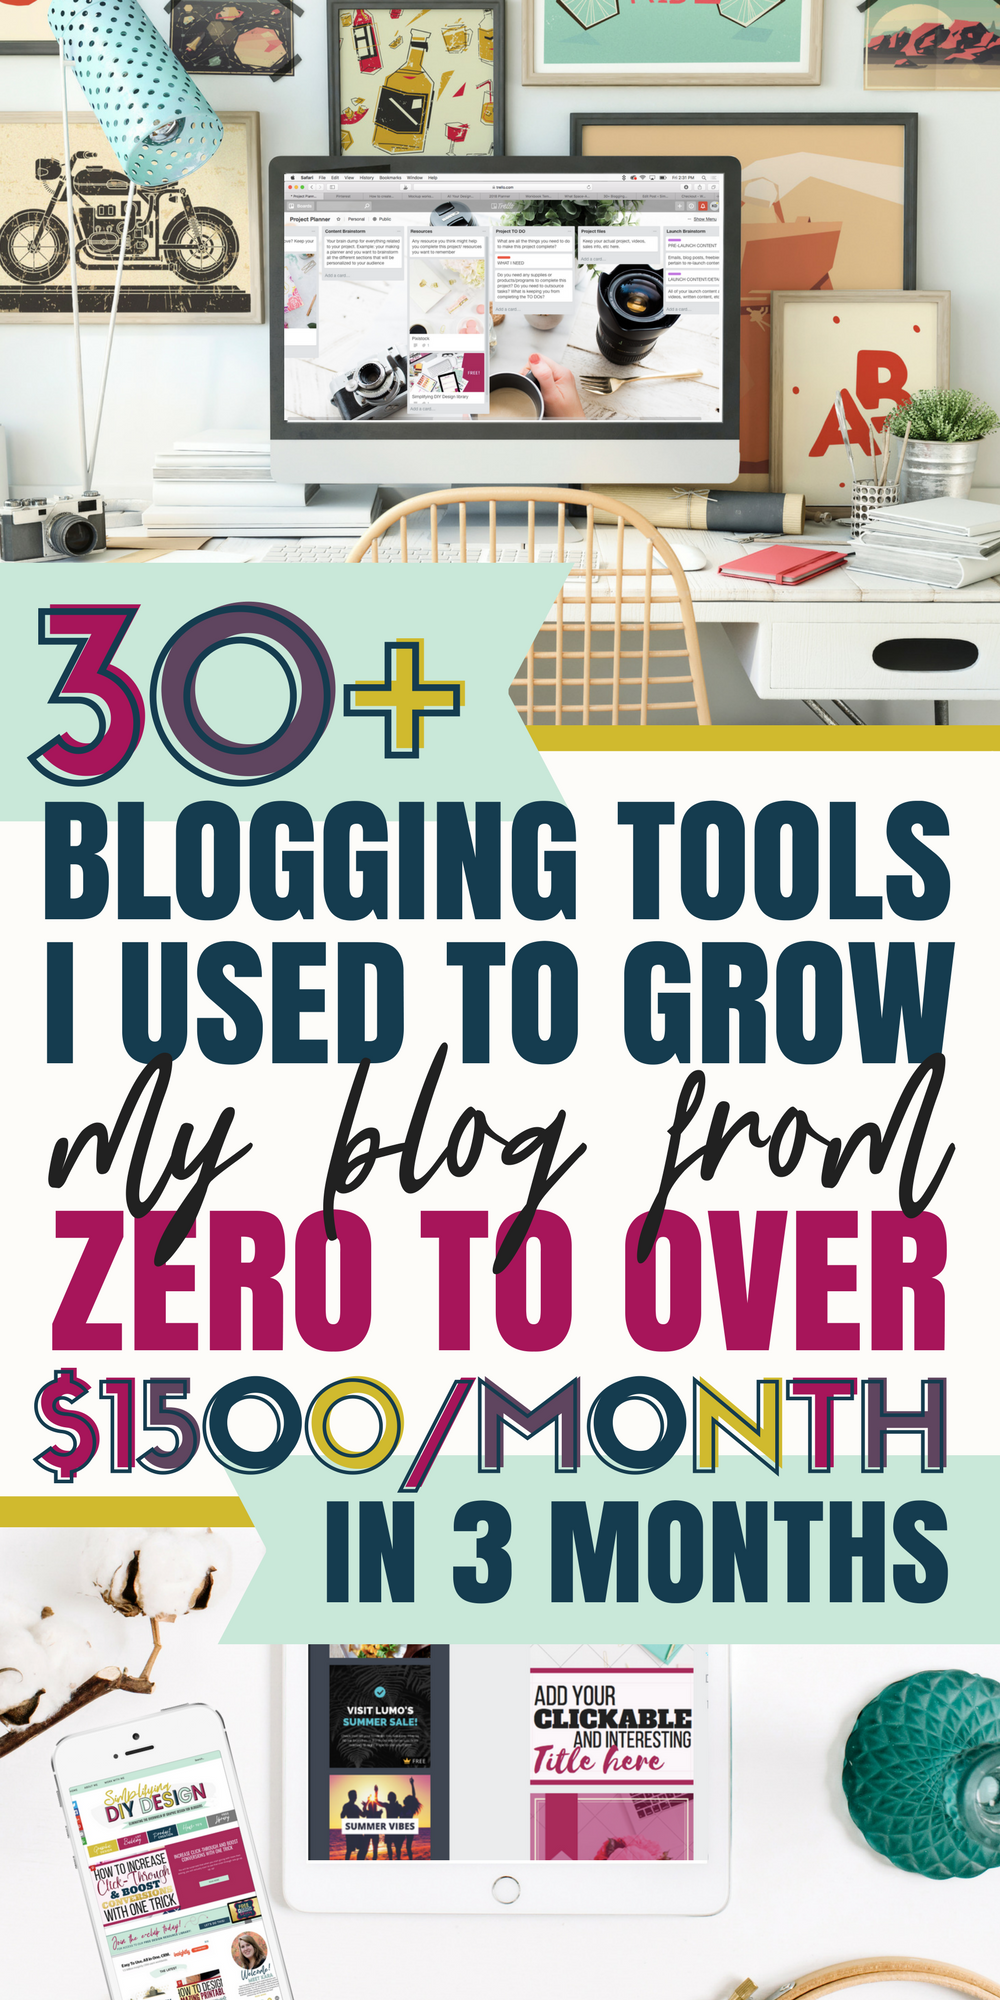 I always struggled to grow my blog but then I found these amazing and mostly free resources. These are the exact products and blogging tools I used to grow my blog- and grow my email list- from zero to actually making money from home